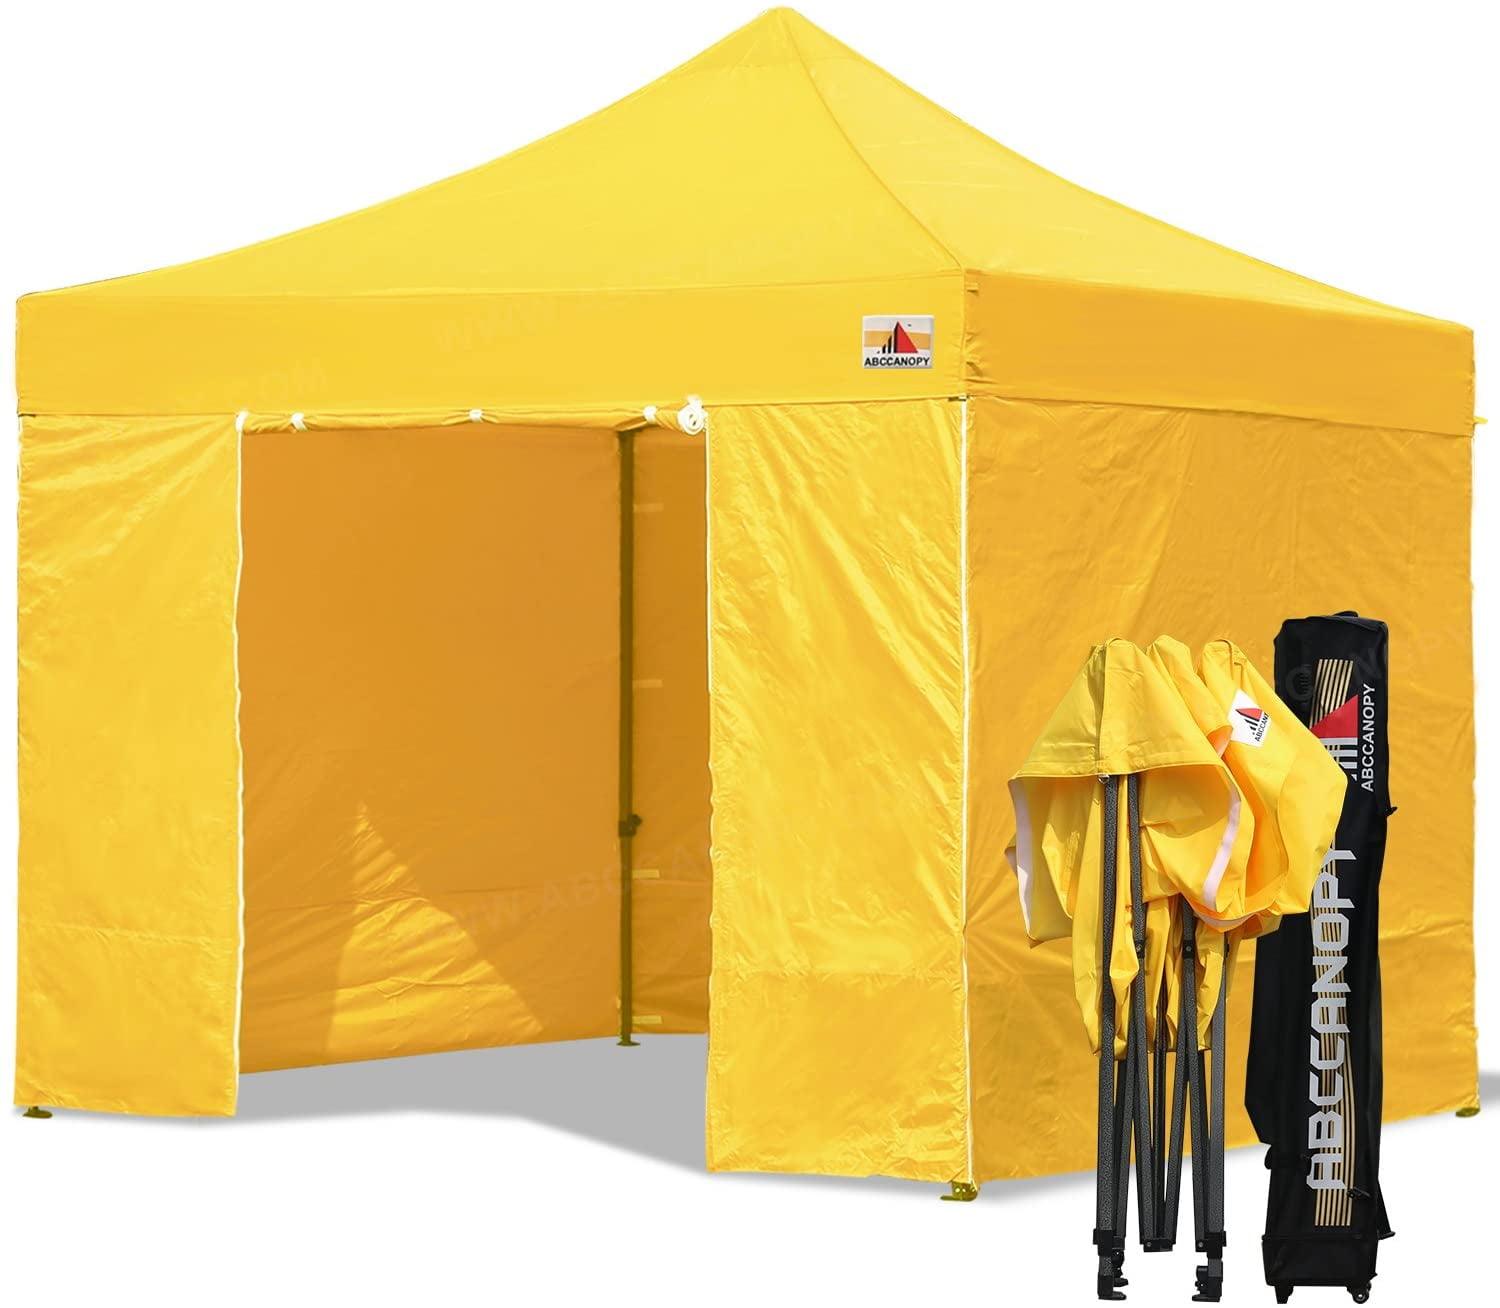 ABCCANOPY Tents Canopy Tent 10 x 10 Pop Up Canopies Commercial Tents Market stall with 6 Removable Sidewalls and Roller Bag Bonus 4 Weight Bags and 10ft Screen Netting and Half Wall,RED 